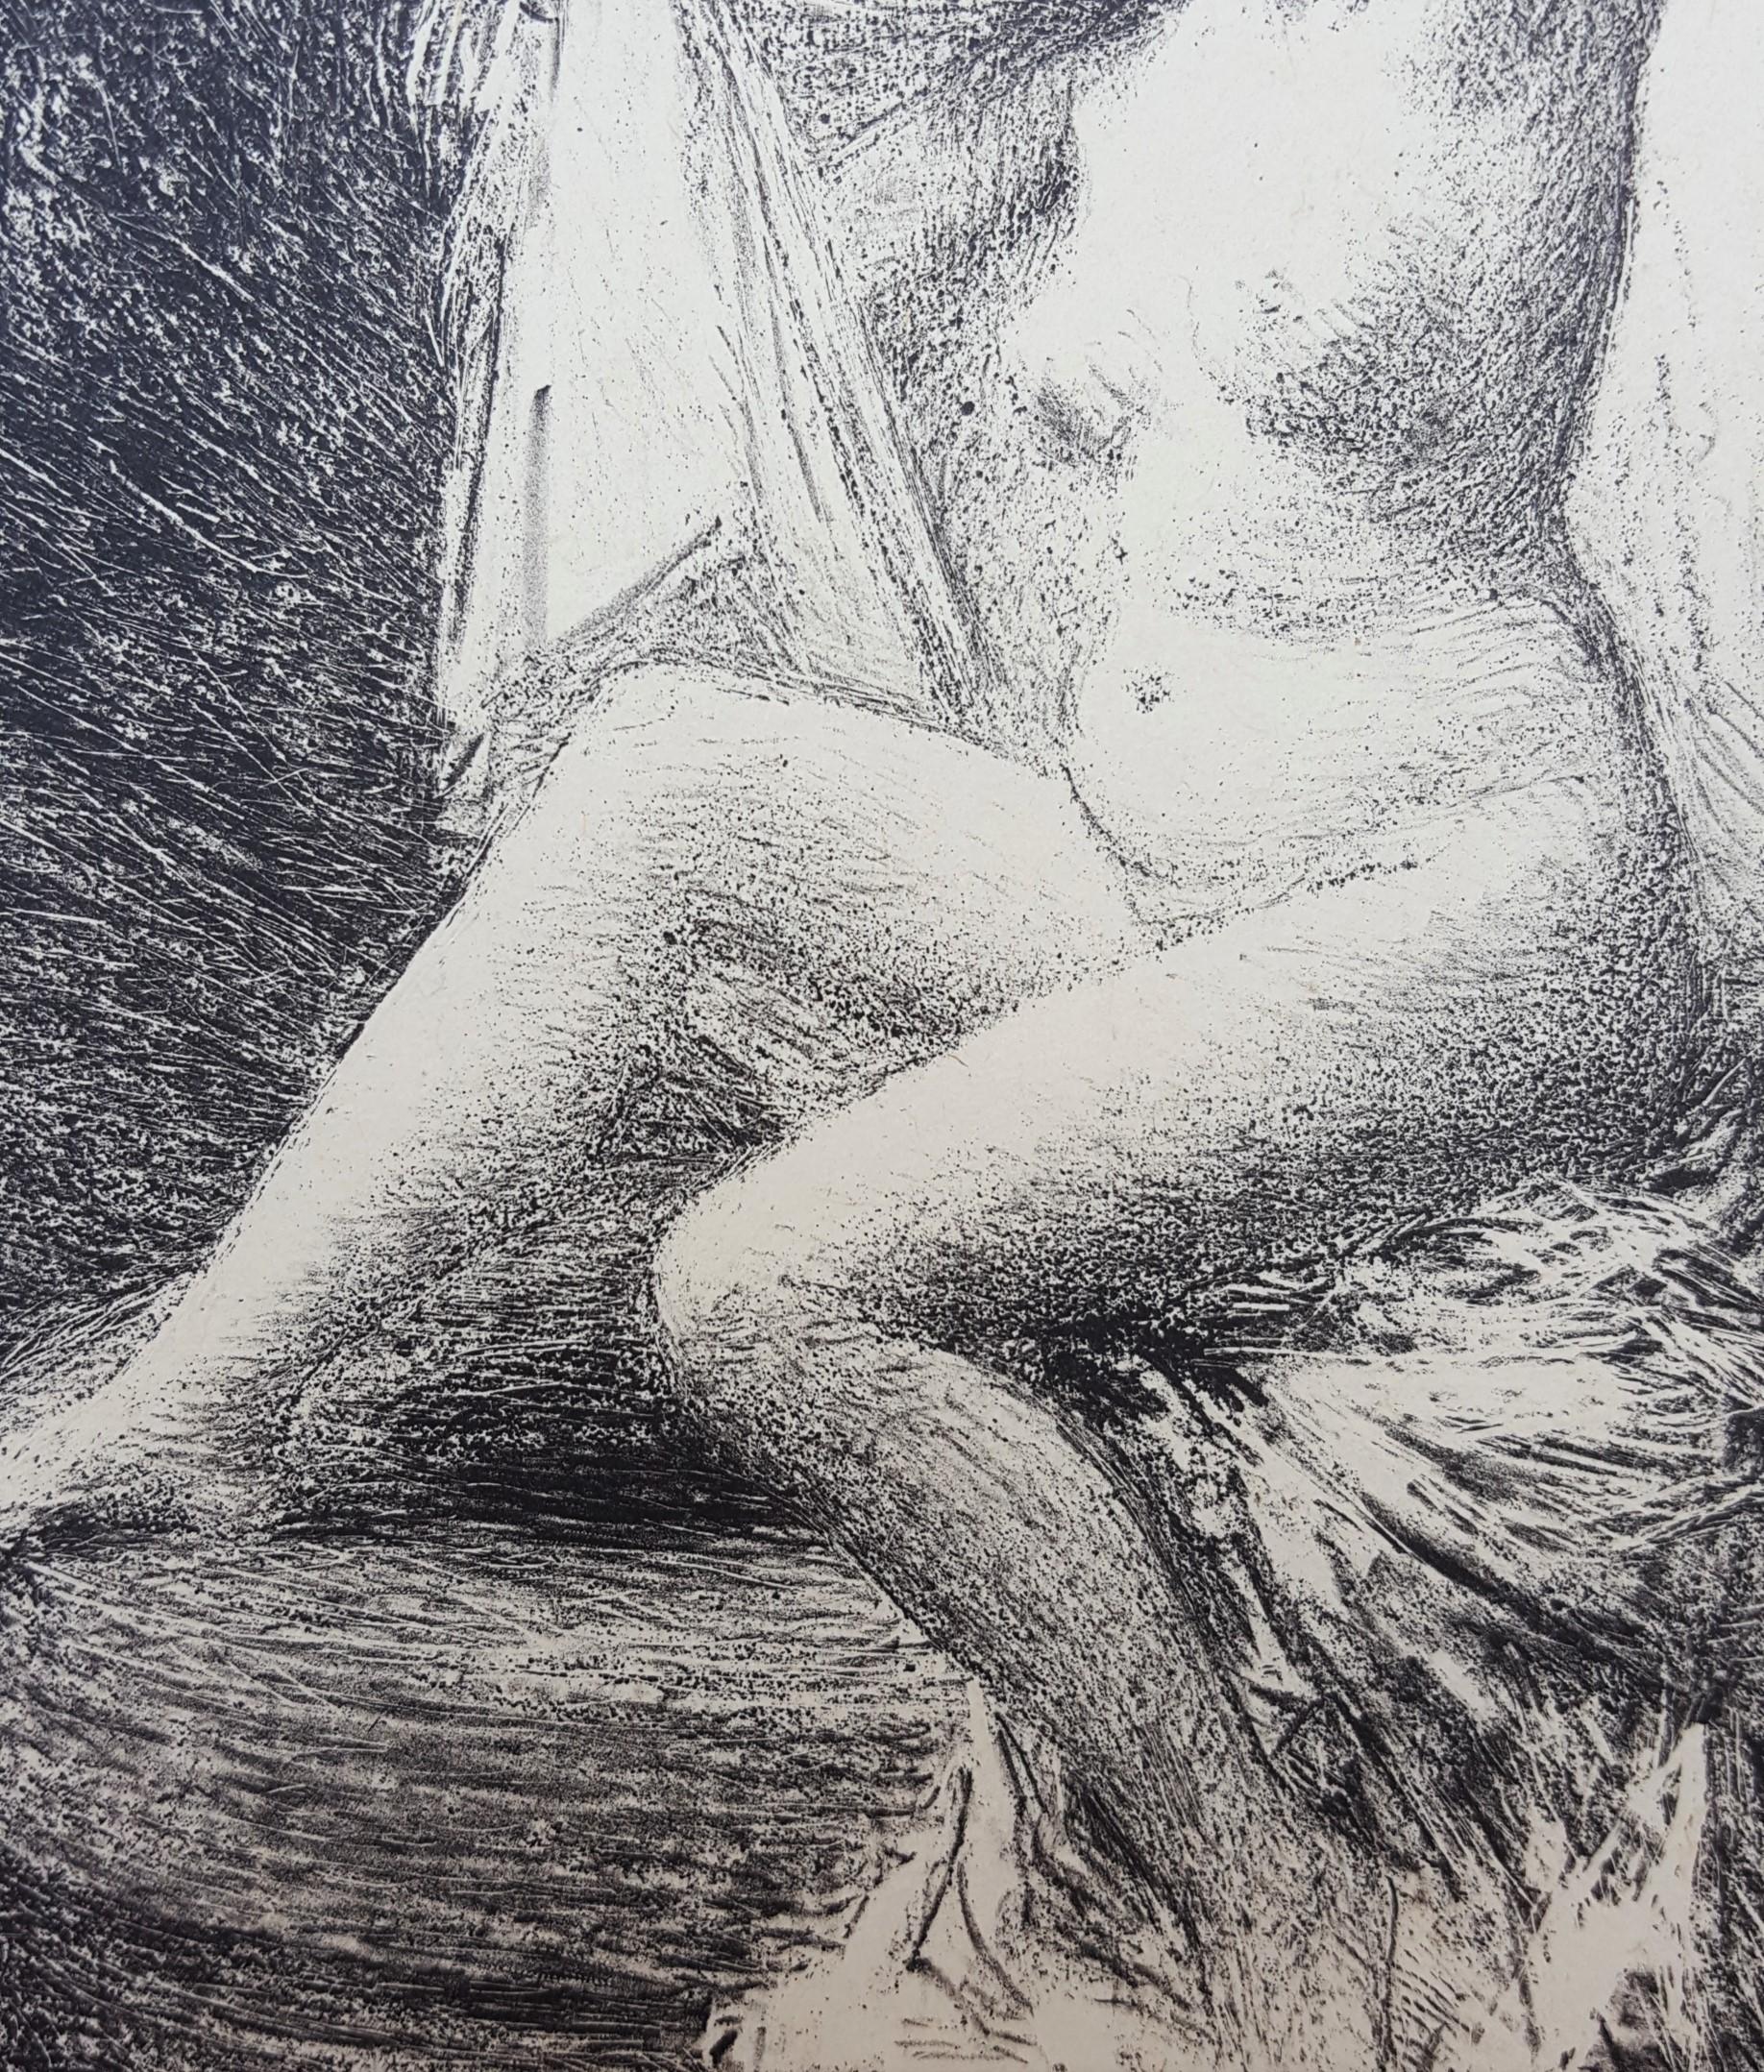 Vérité (Truth) /// French Modern Impressionist Art Lithograph Nude Figurative  For Sale 6